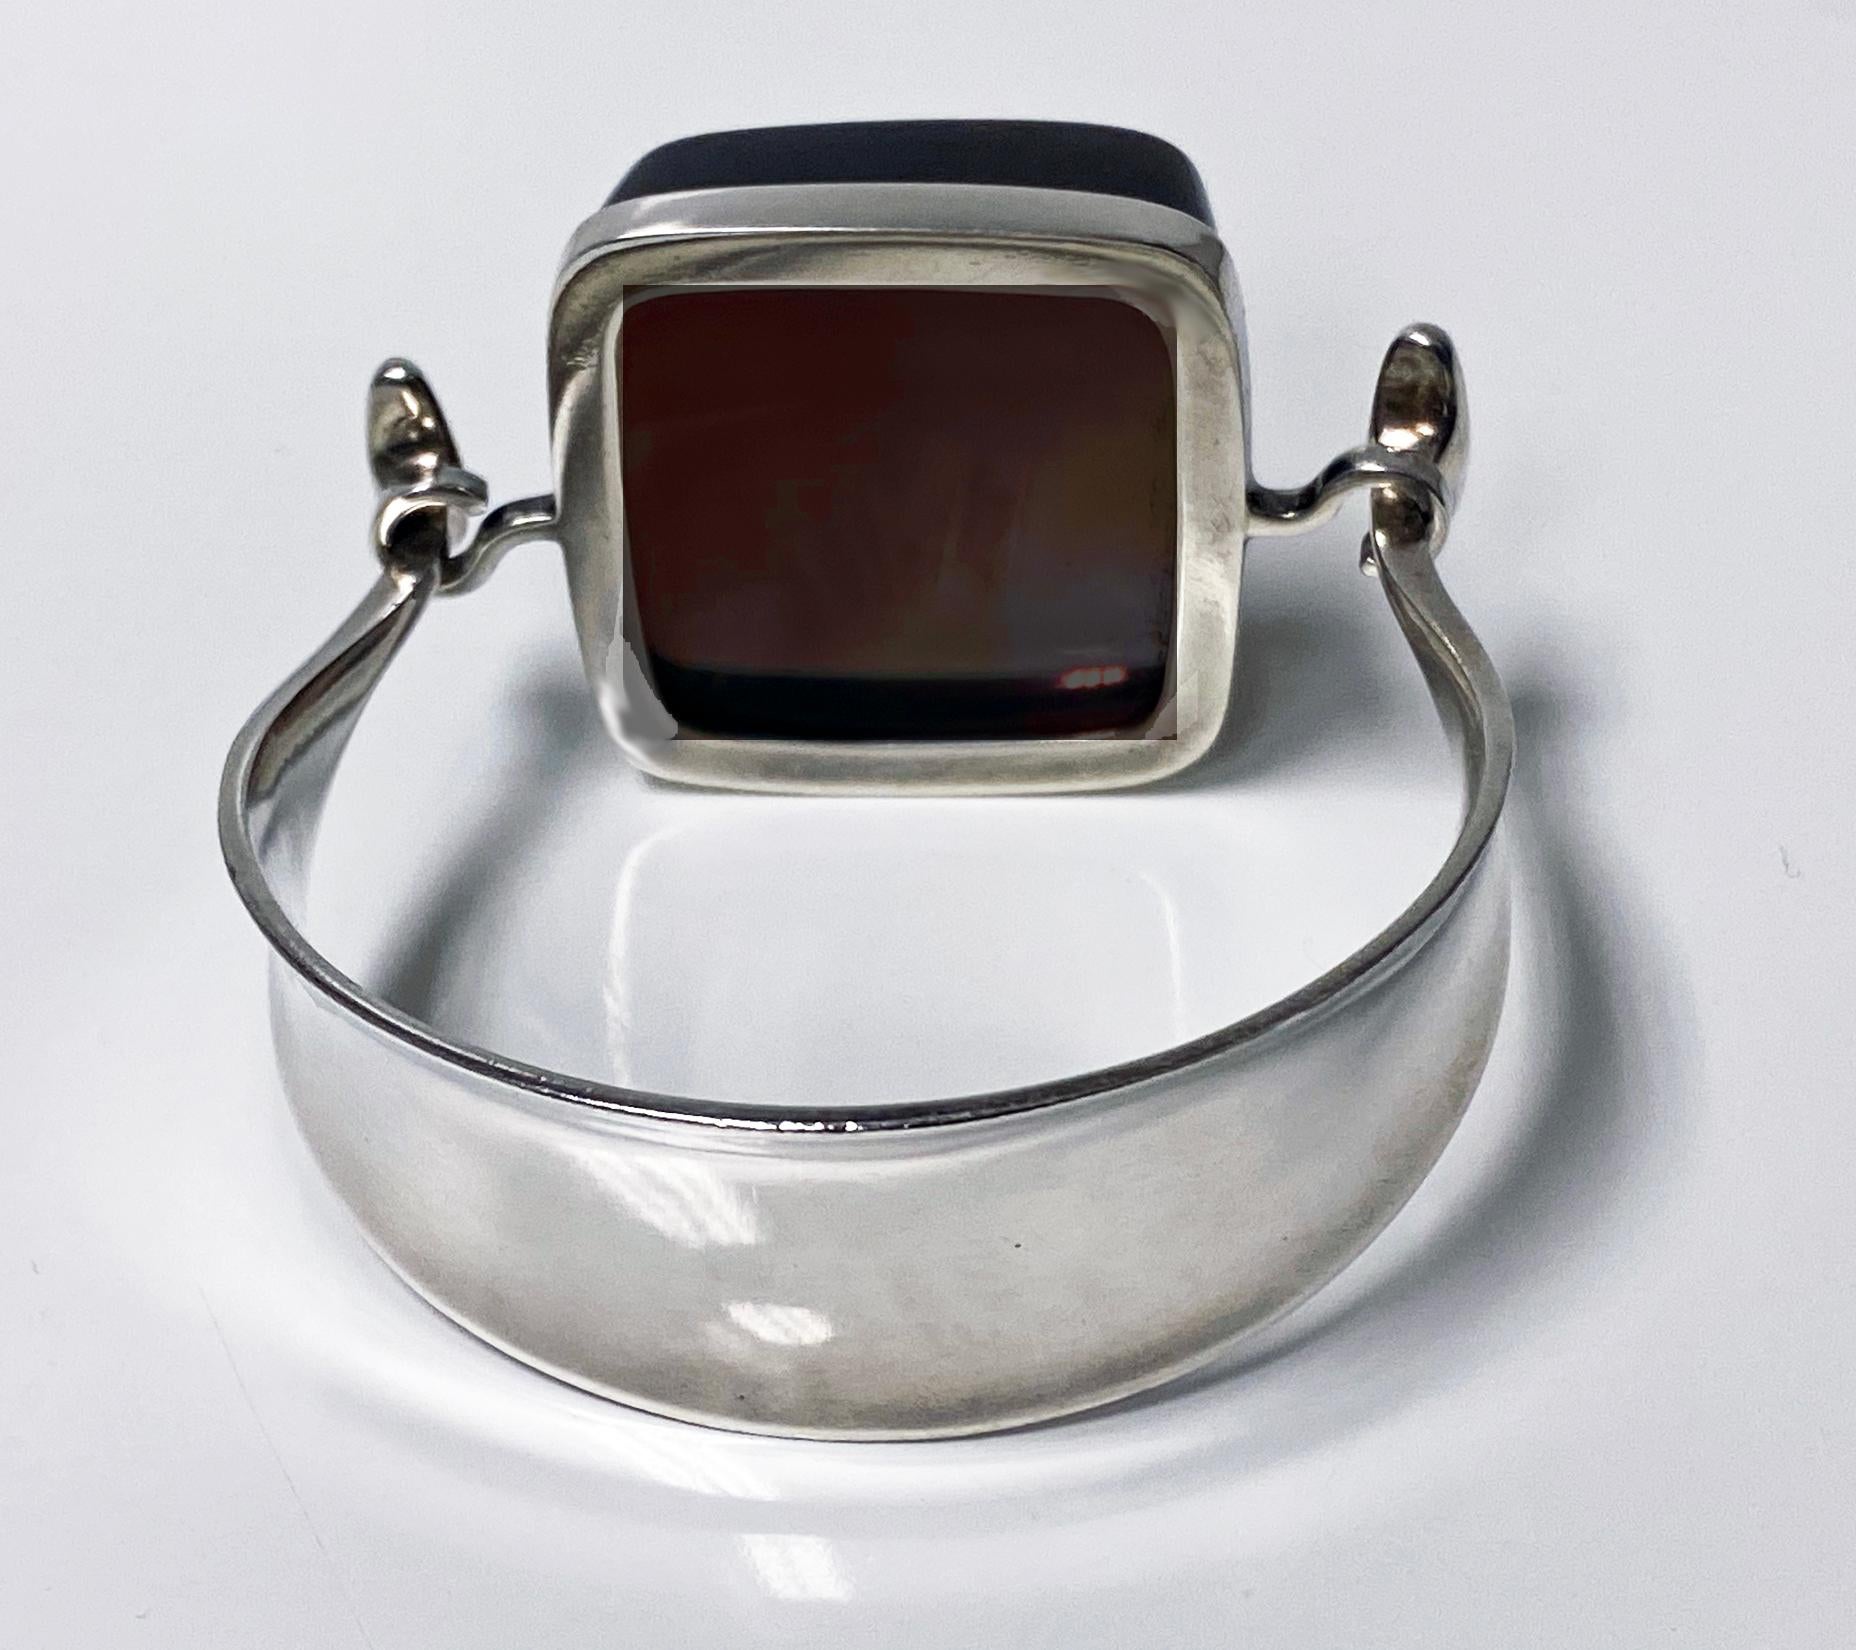 Georg Jensen Bangle topaz colour rock crystal model # 203B Designed by Vivianna Torun Bülow-Hübe C. 1969. Sterling Silver extremely rare design. Fits wrists up to 7 inches, tension clamp opening. Approximate dimensions: bangle circumference inside: